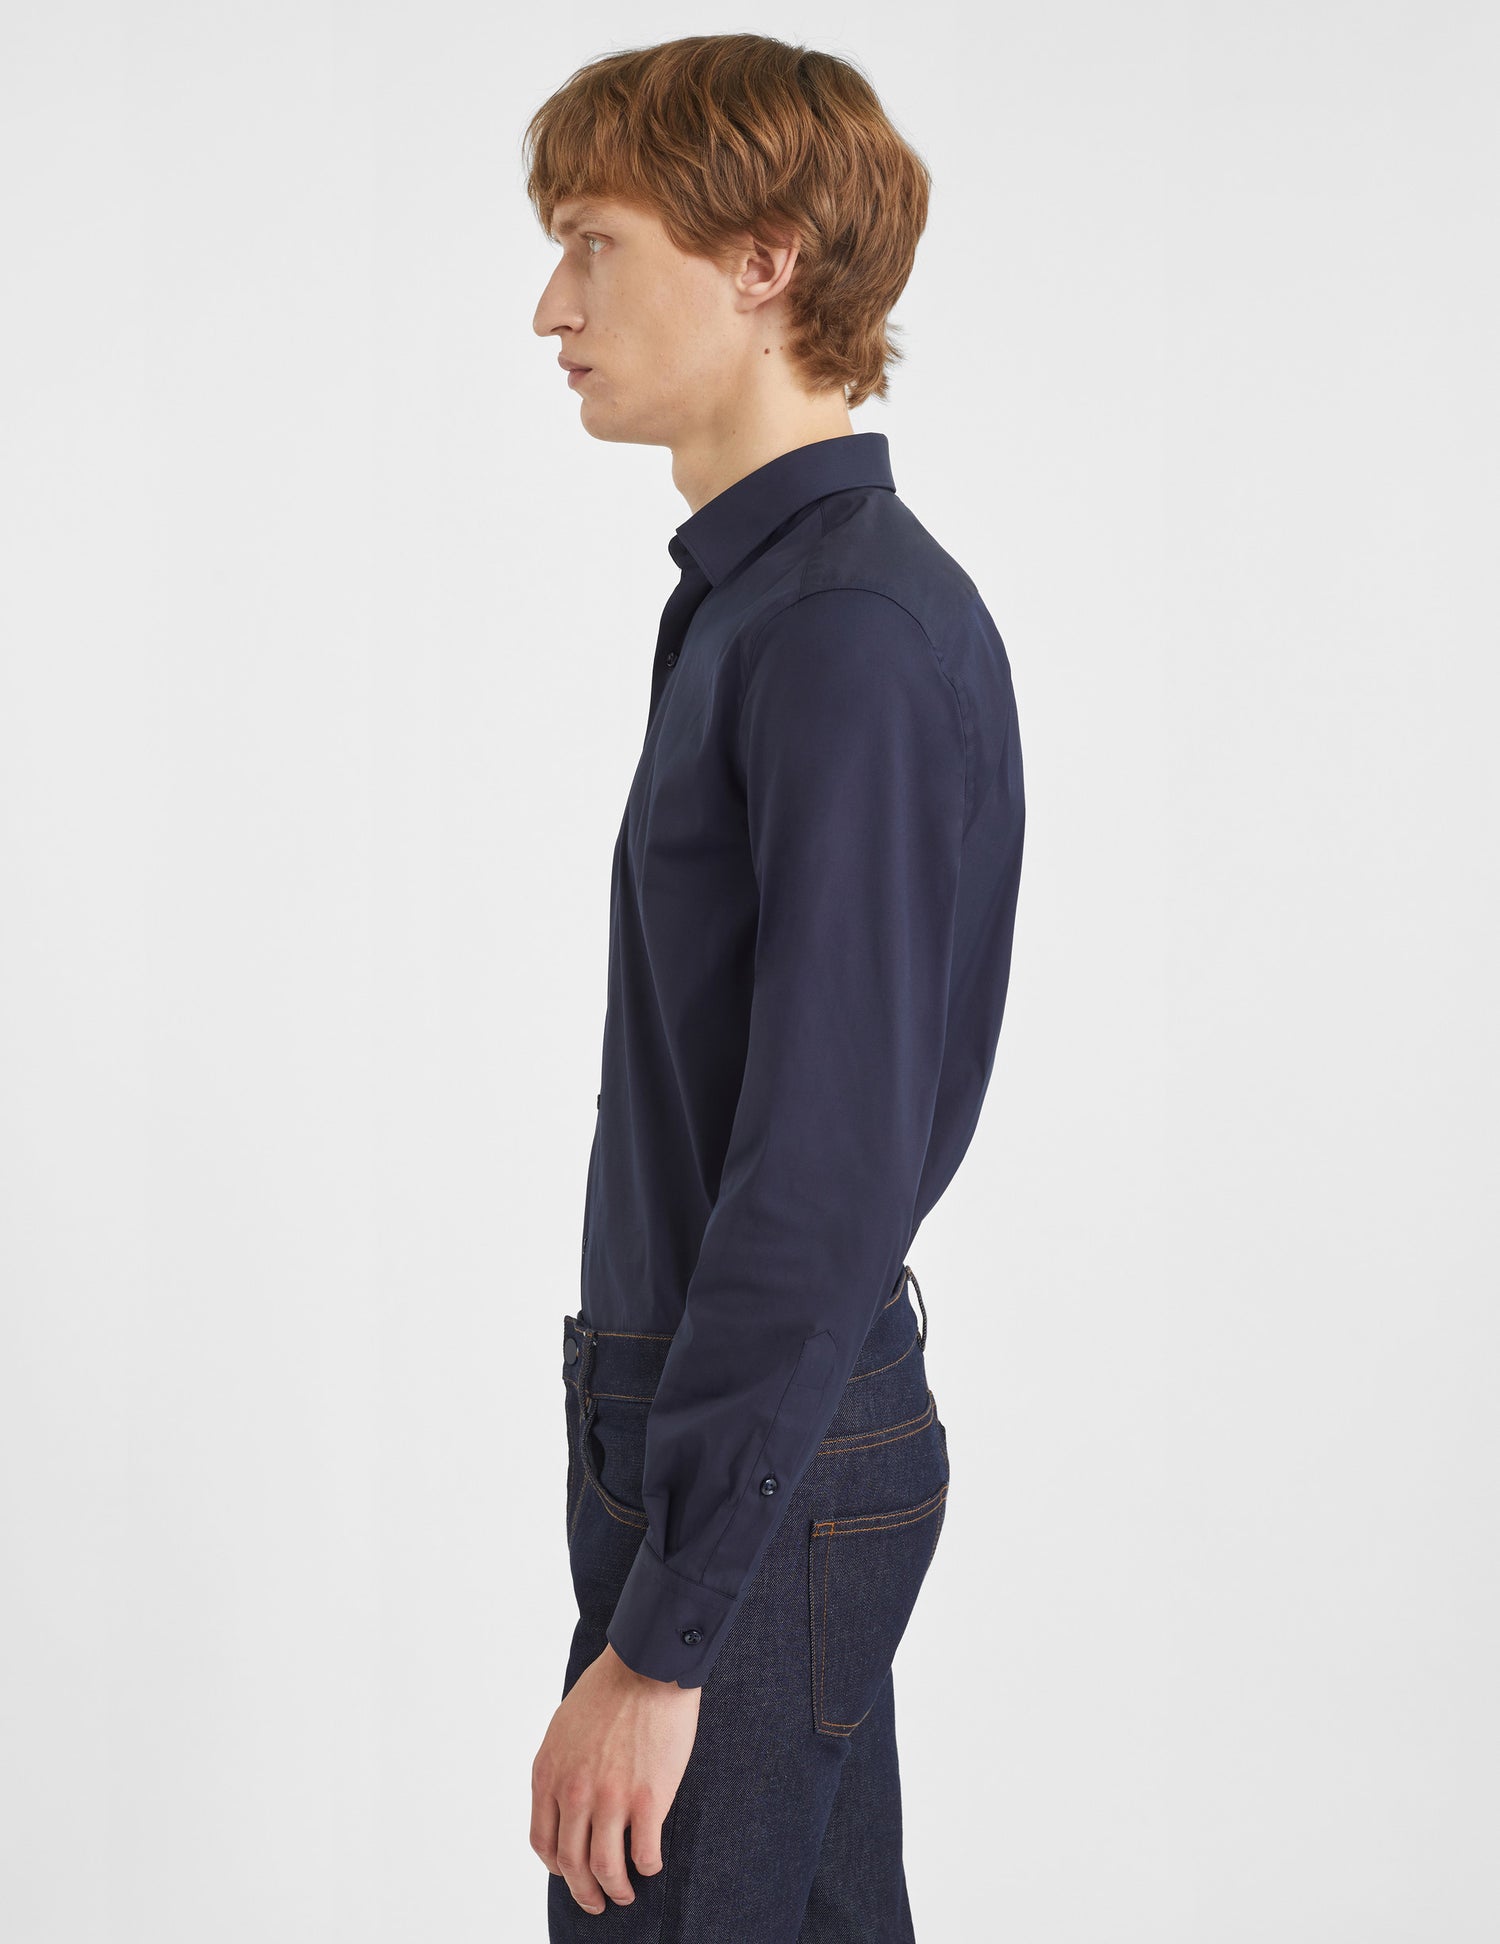 Fitted navy stretch shirt - Poplin - Figaret Collar#6